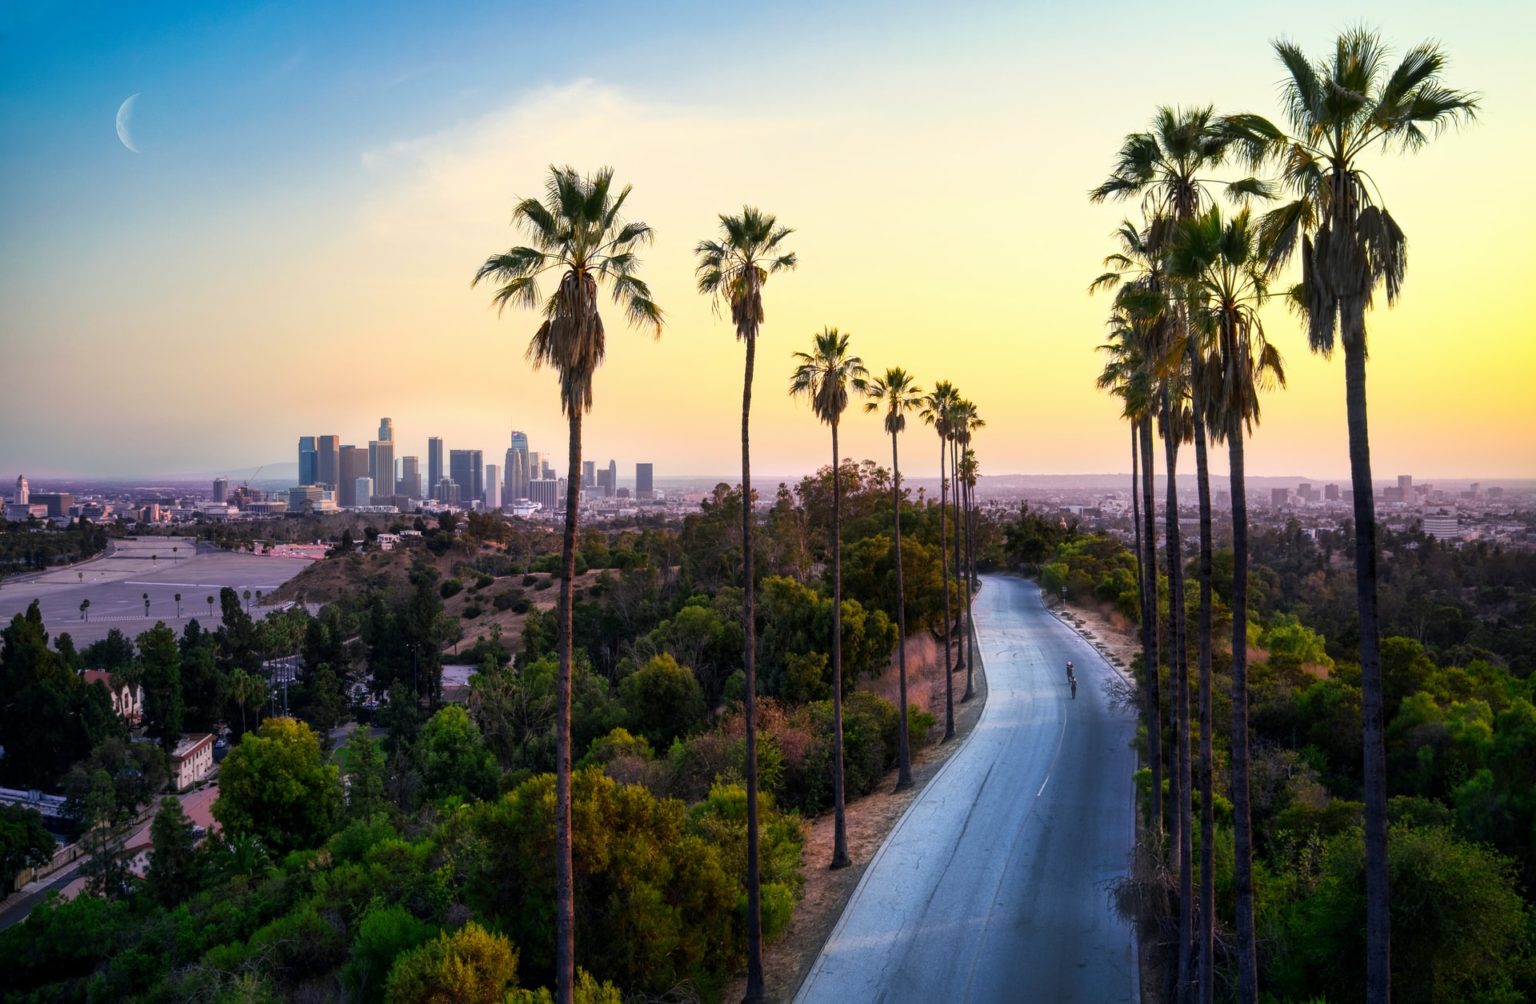 Road lined with palm trees with Los Angeles skyline in background